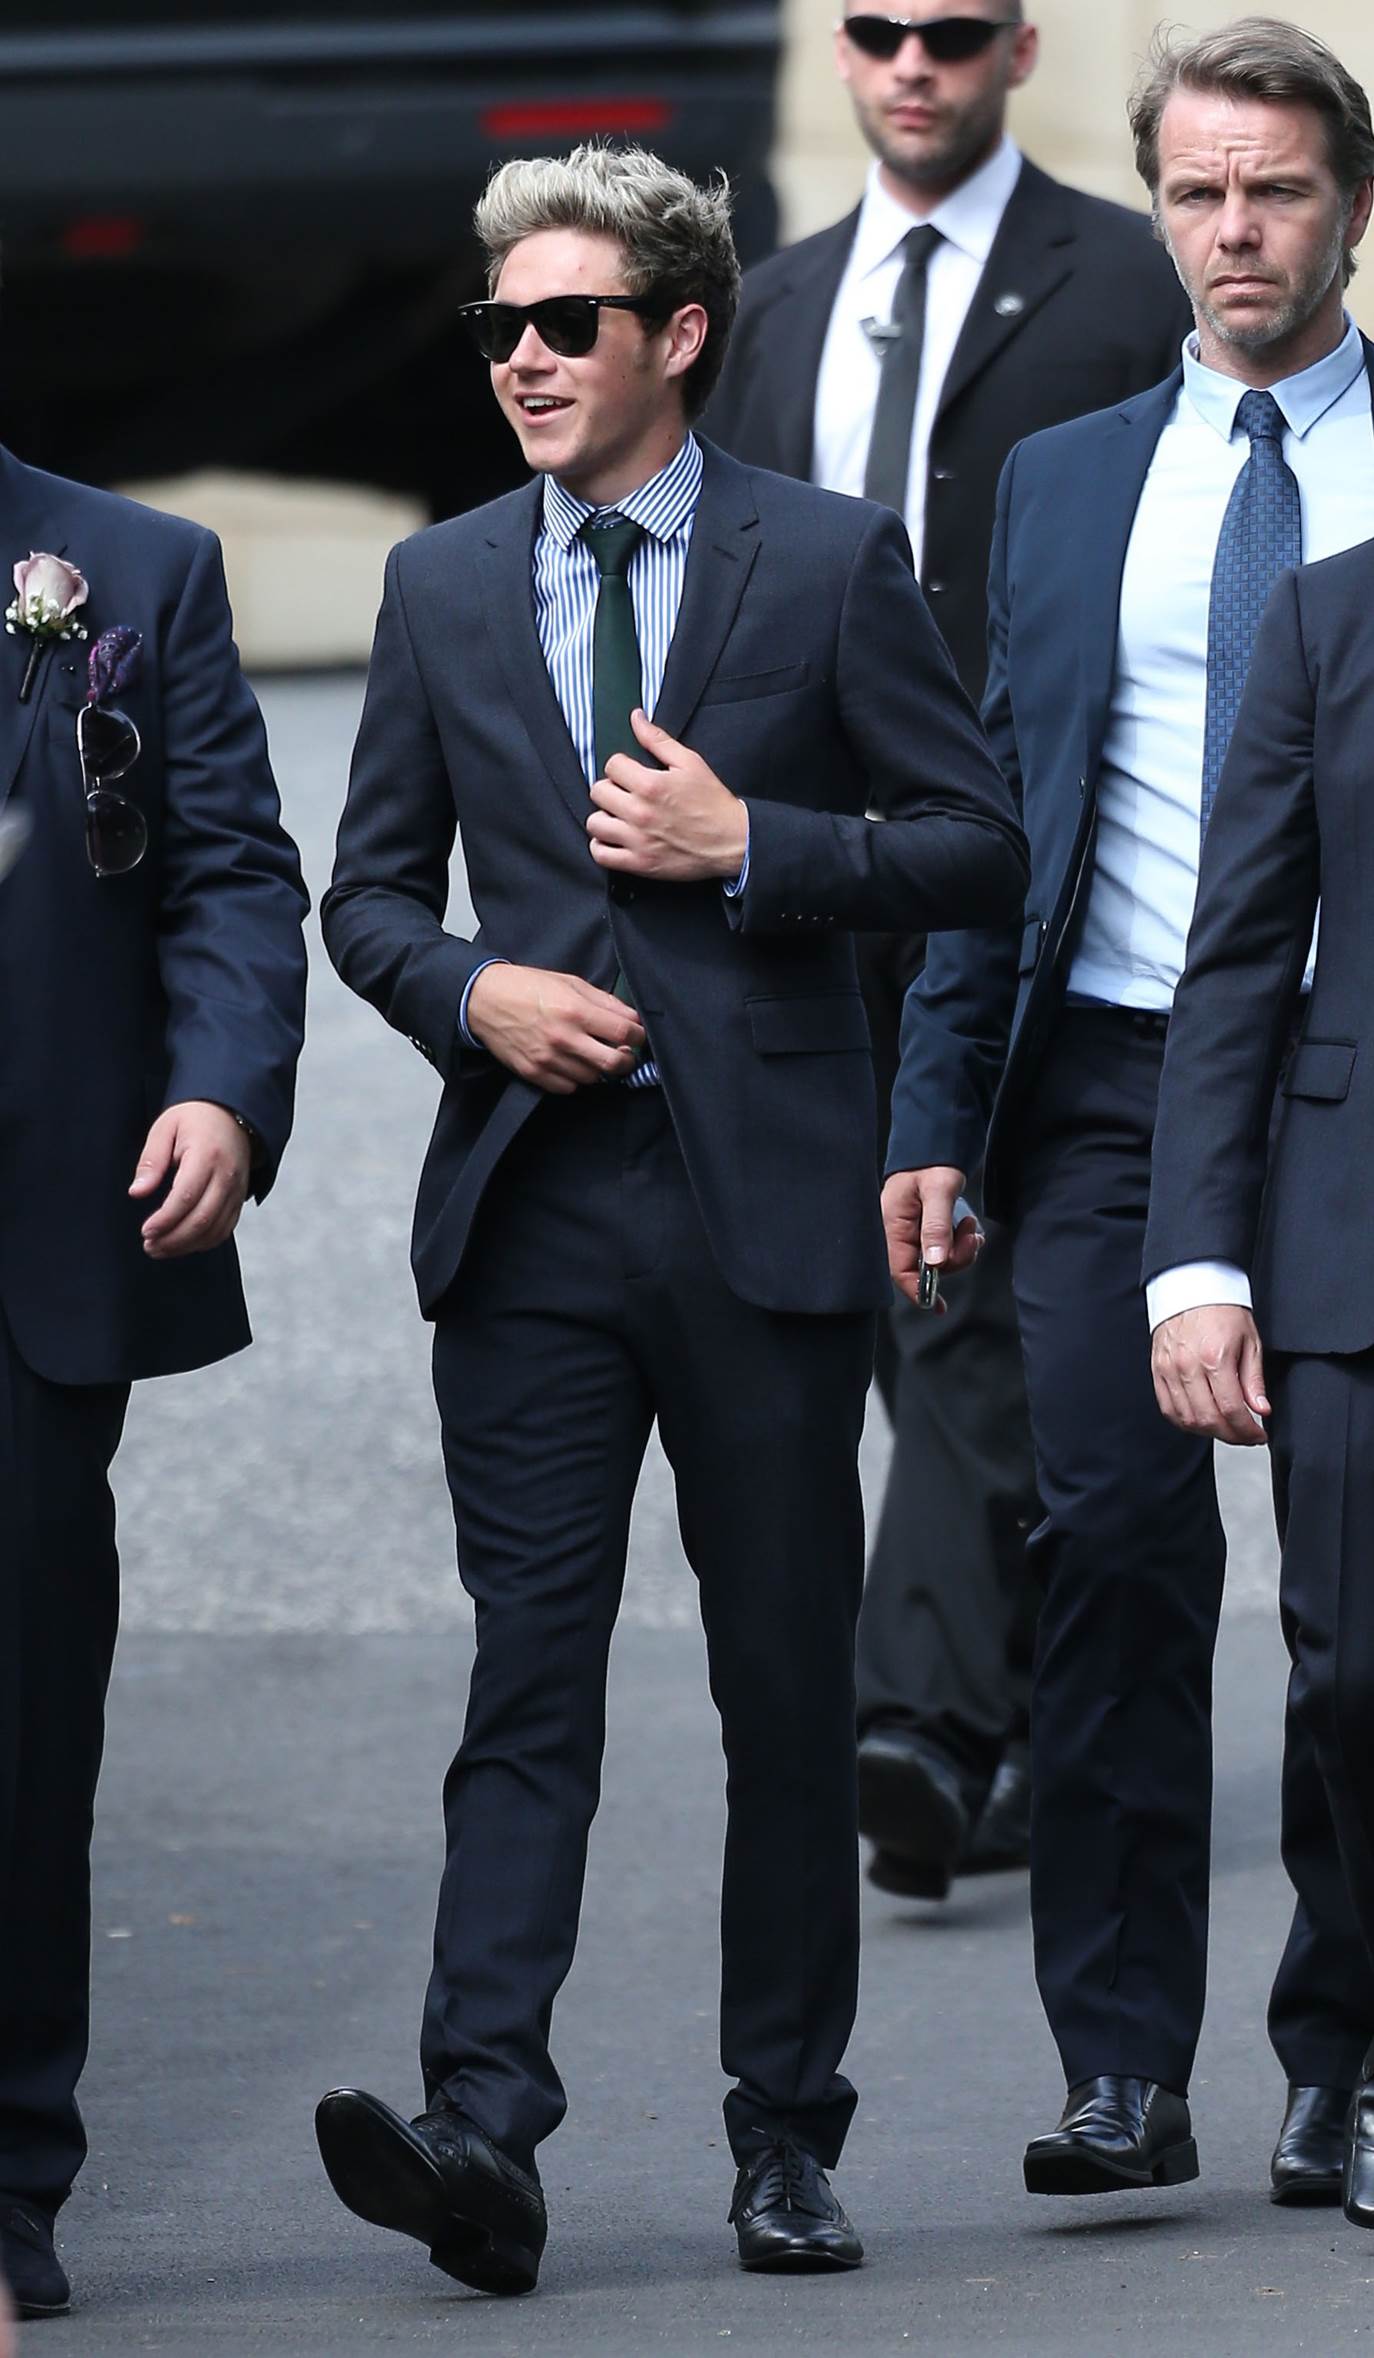 Niall Horan wearing Burberry tailoring to a wedding over the weekend